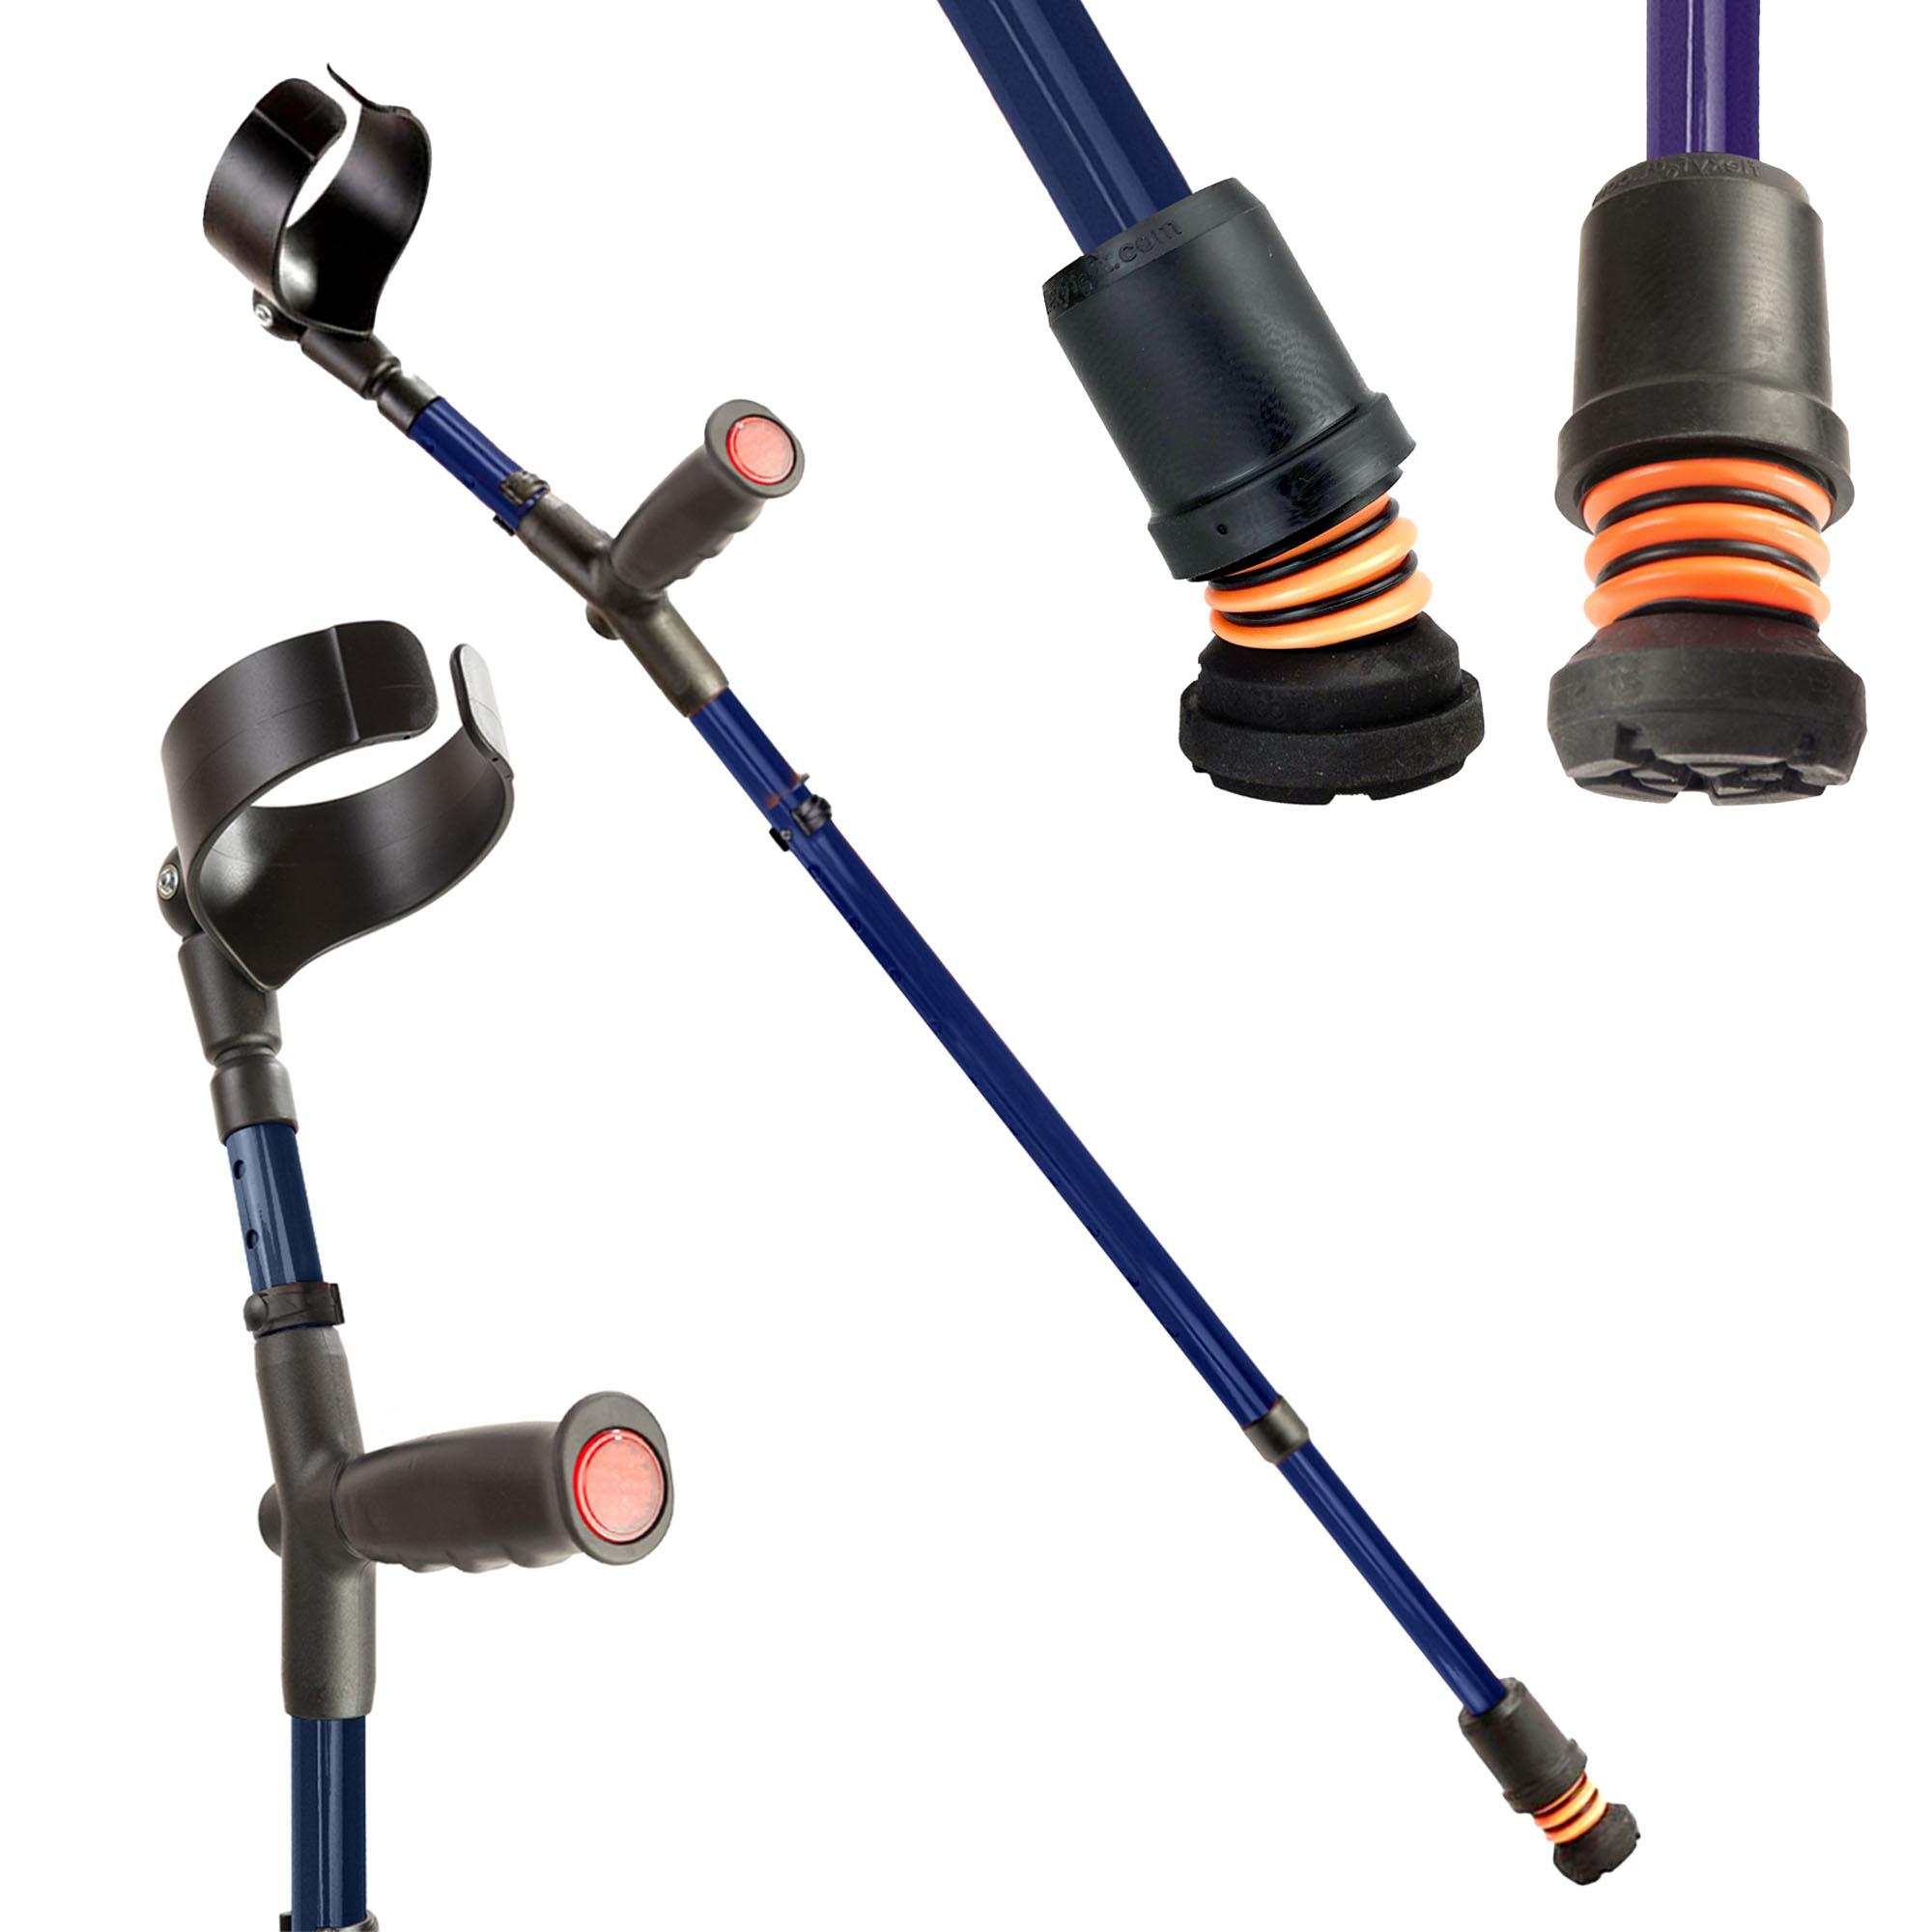 Flexyfoot Premium Closed Cuff Soft Grip Crutches - Double Adjustable Kent showroom